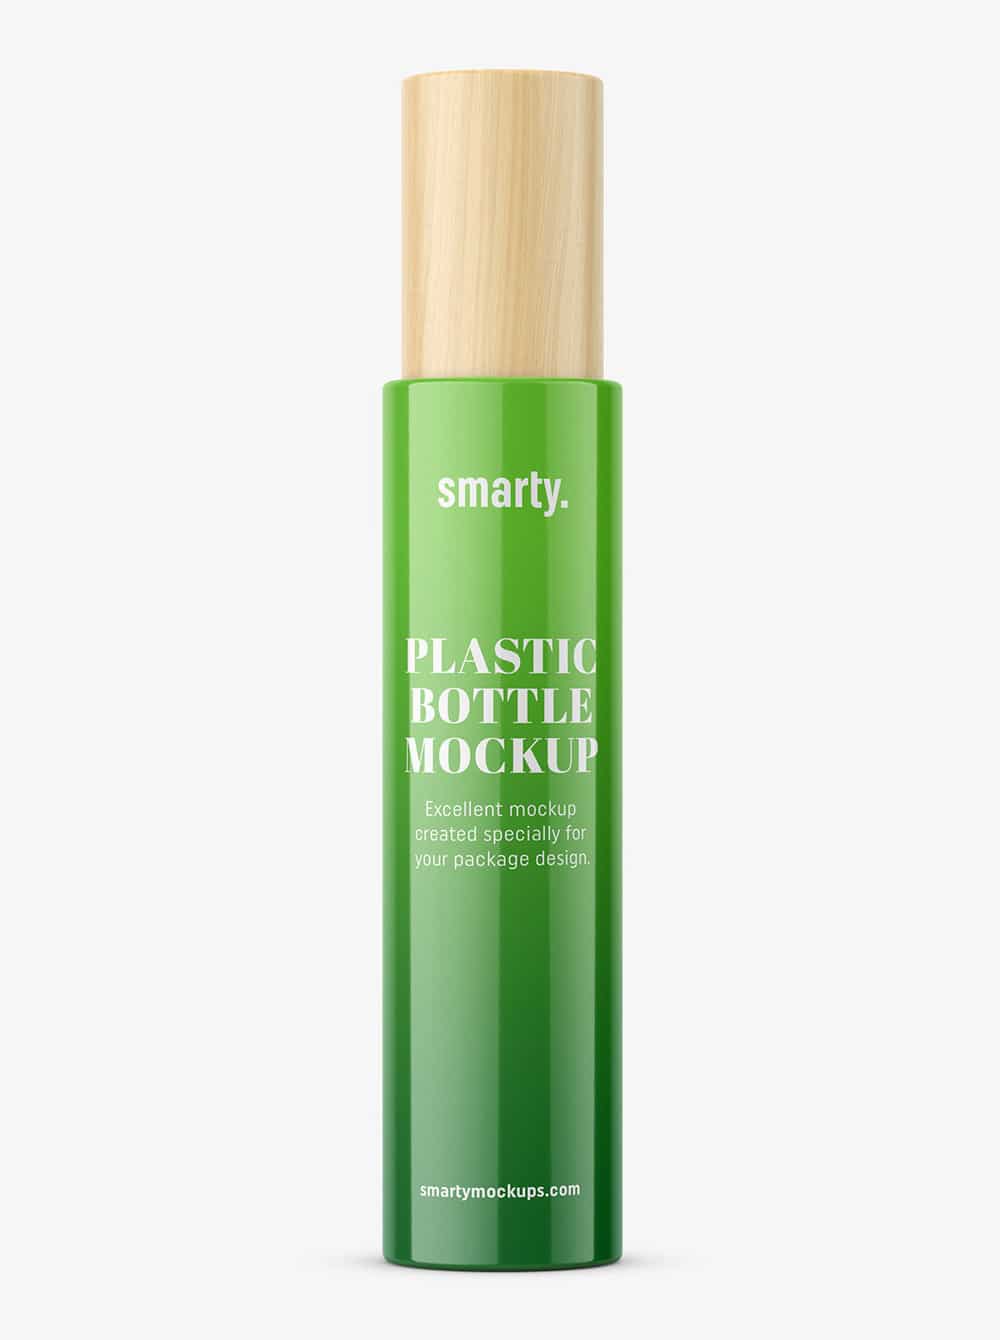 Glossy Bottle With Wooden Cap Mockup